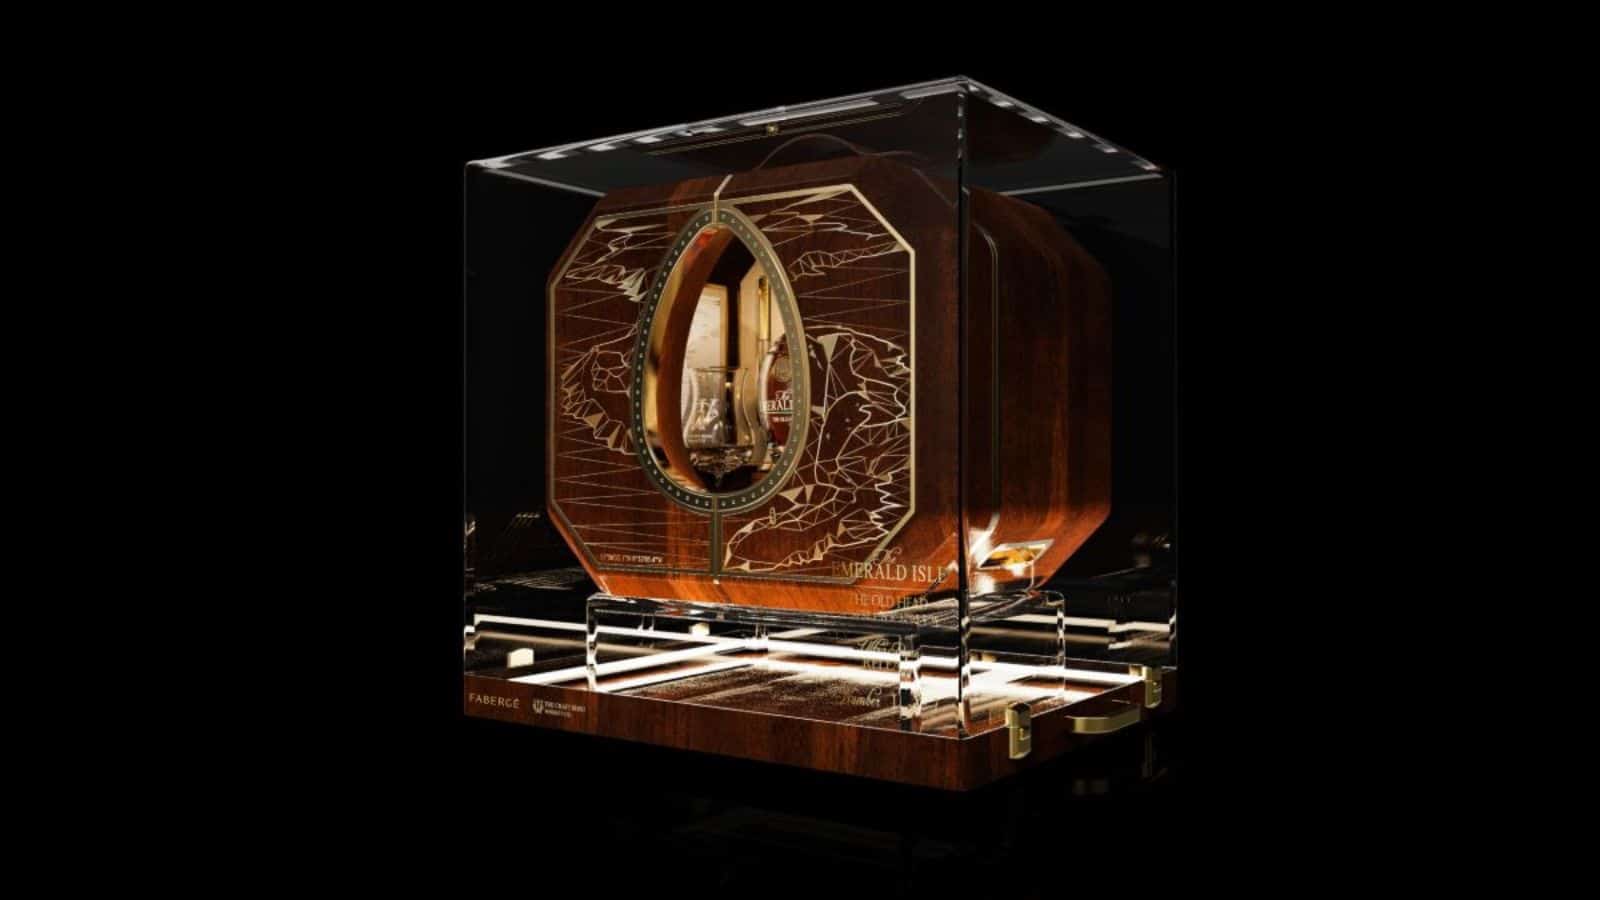 The most expensive whiskey set in the world